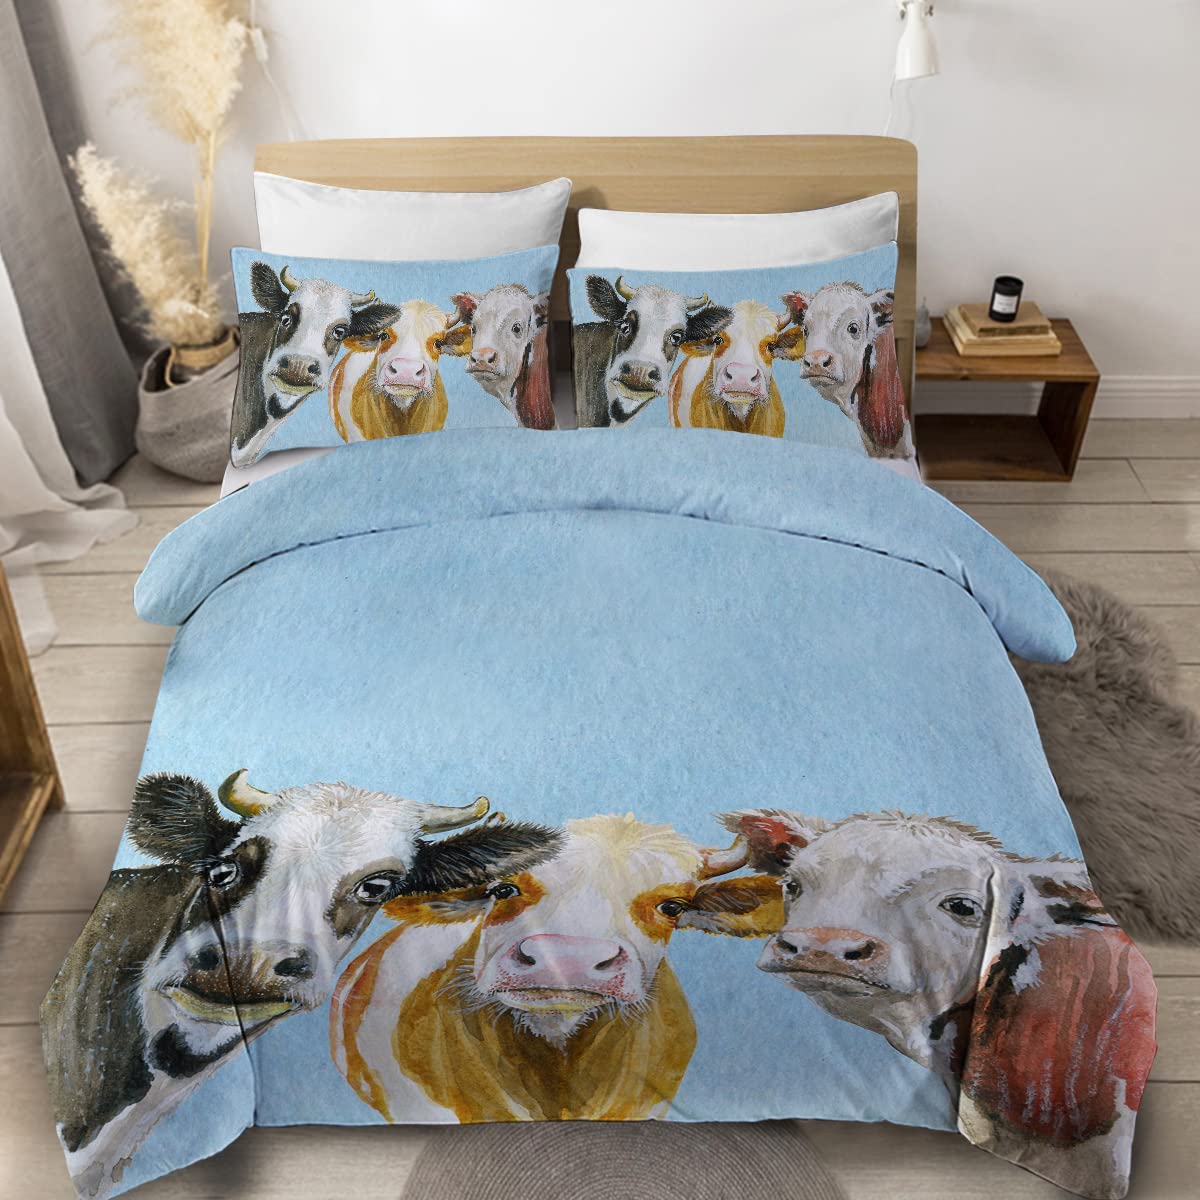 Farmer Cow Print Duvet Cover Set Oil Painting Cow Bedding Set Vintage Animals Dog Pig Chicken Printed Comforter Cover Full Size